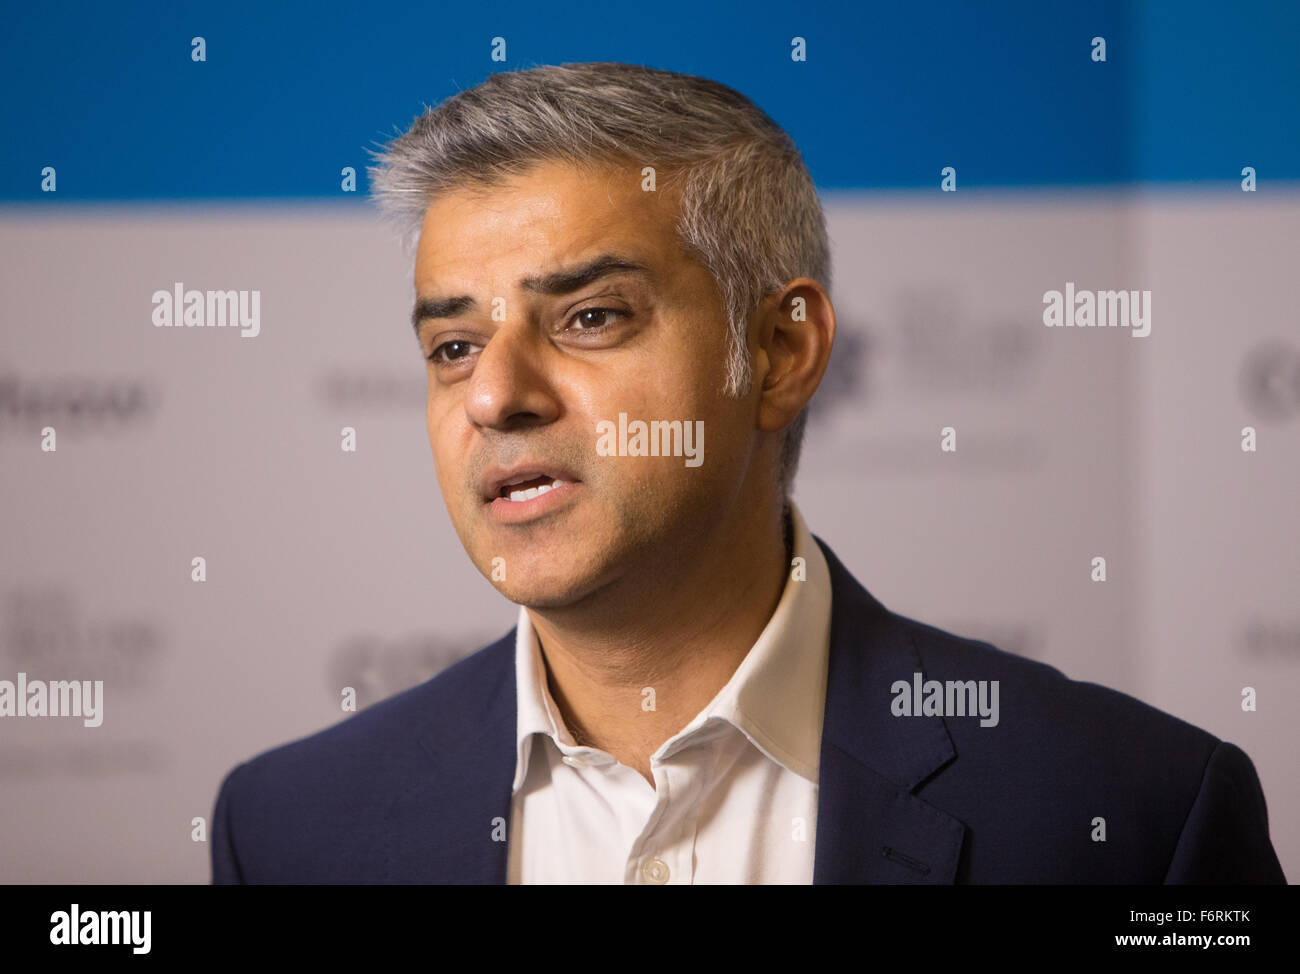 London Mayoral candidate for Labour,Sadiq Khan,speaks at an event about his plans for London,if elected Stock Photo